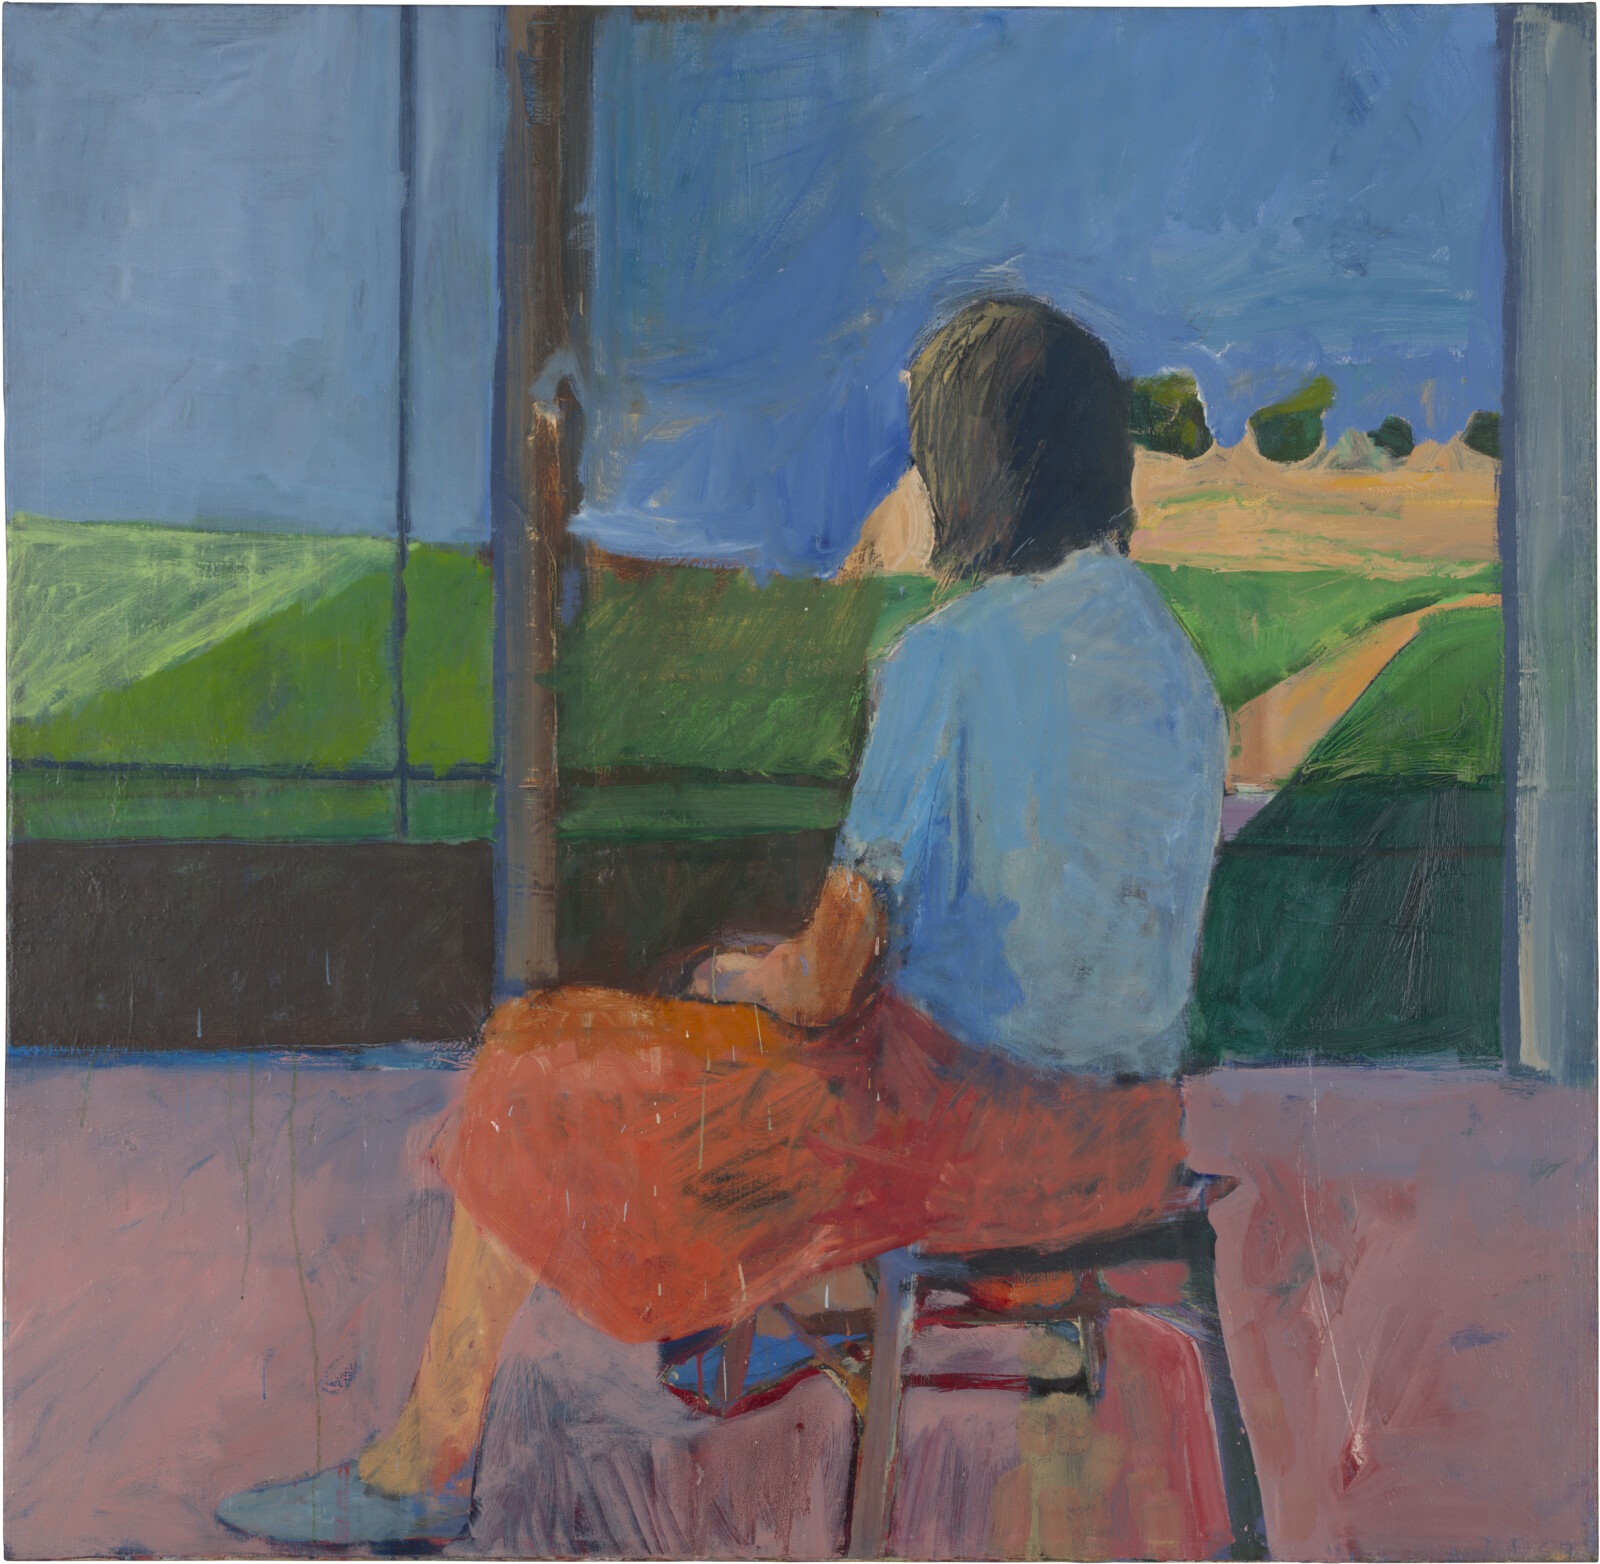 Figures from the 1950s, Selected from the Permanent Collection